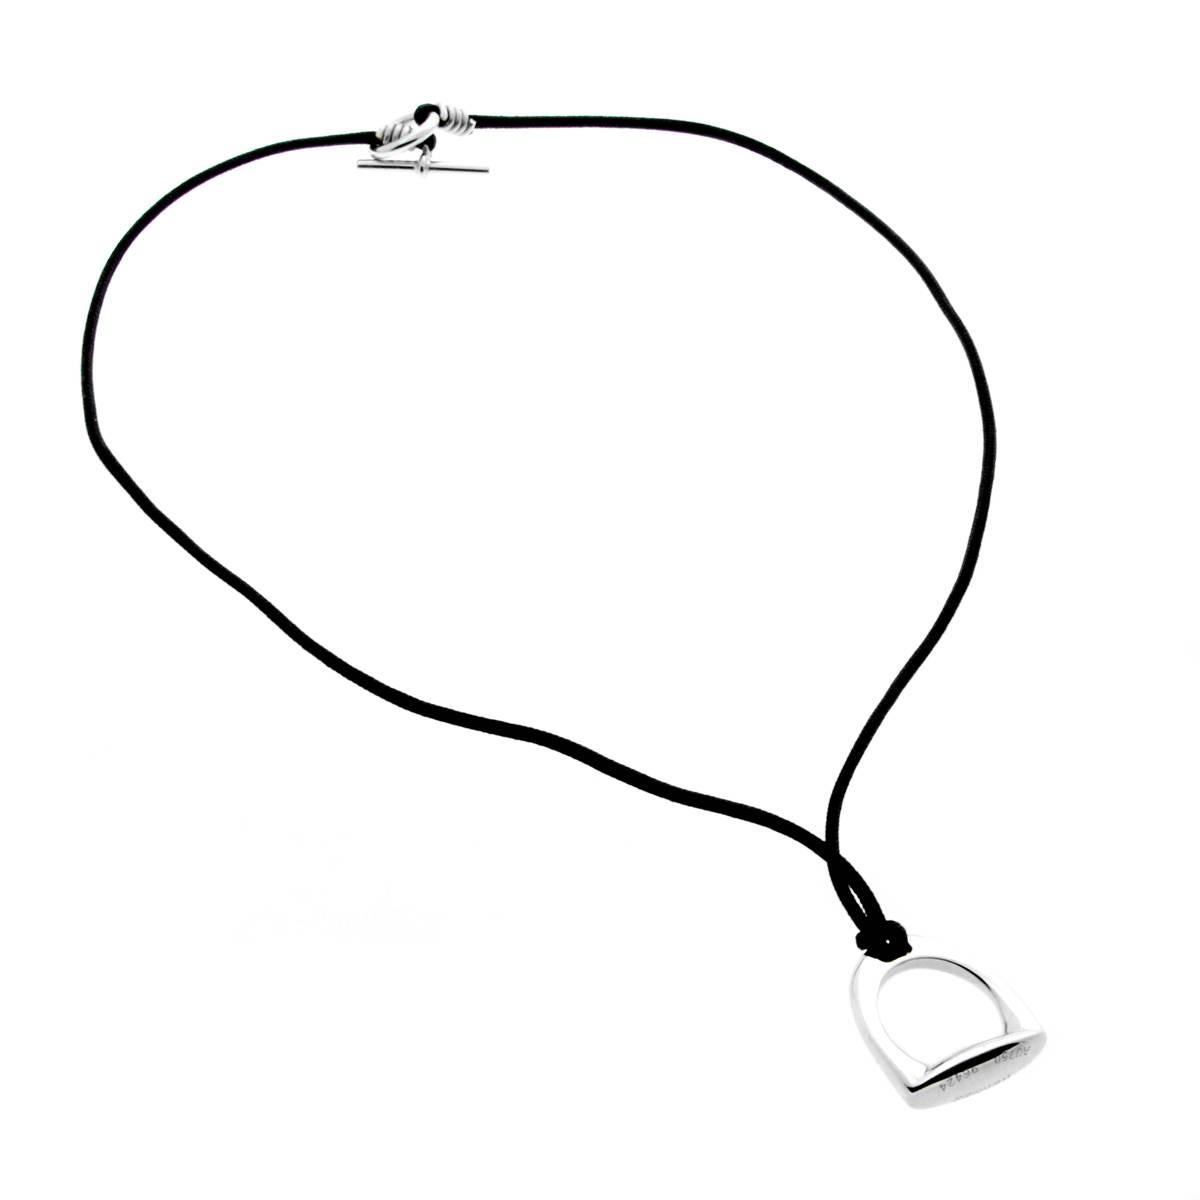 A chic Hermes necklace featuring a solid Stirrup motif crafted in 18k white gold, the pendant is suspended on a black woven string necklace.